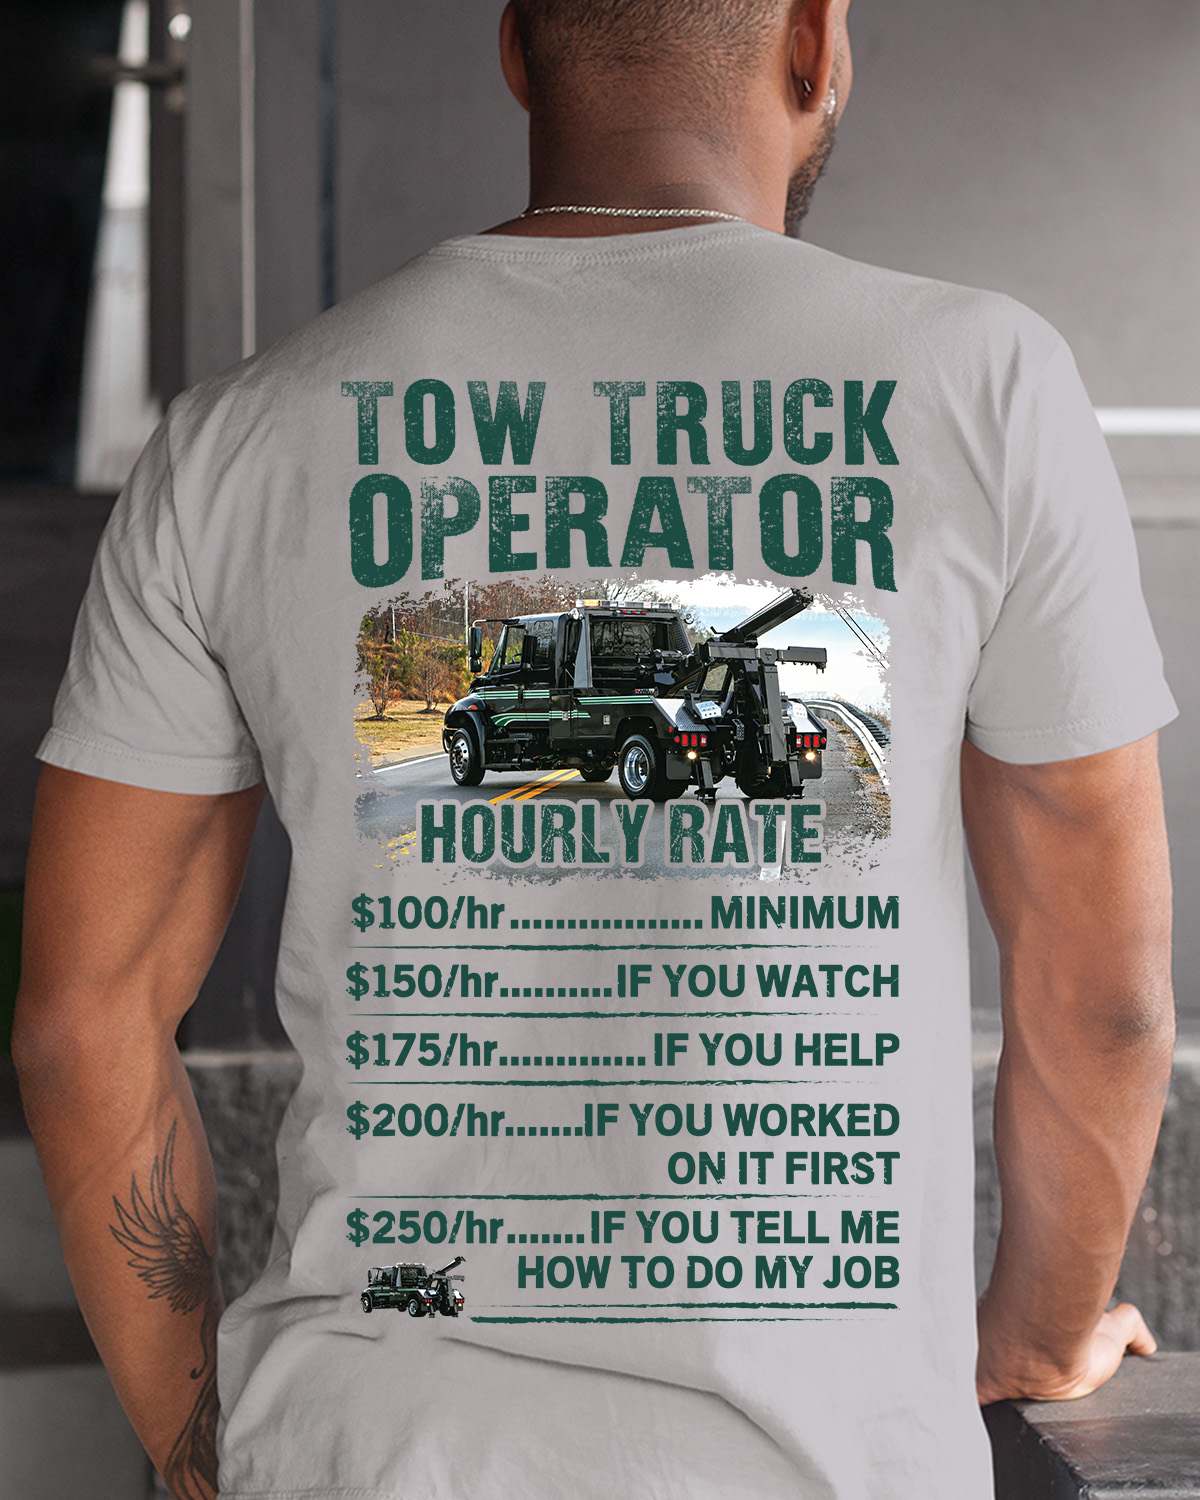 Tow truck operator hourly rate - If you watch, if you help, if you worked on it first